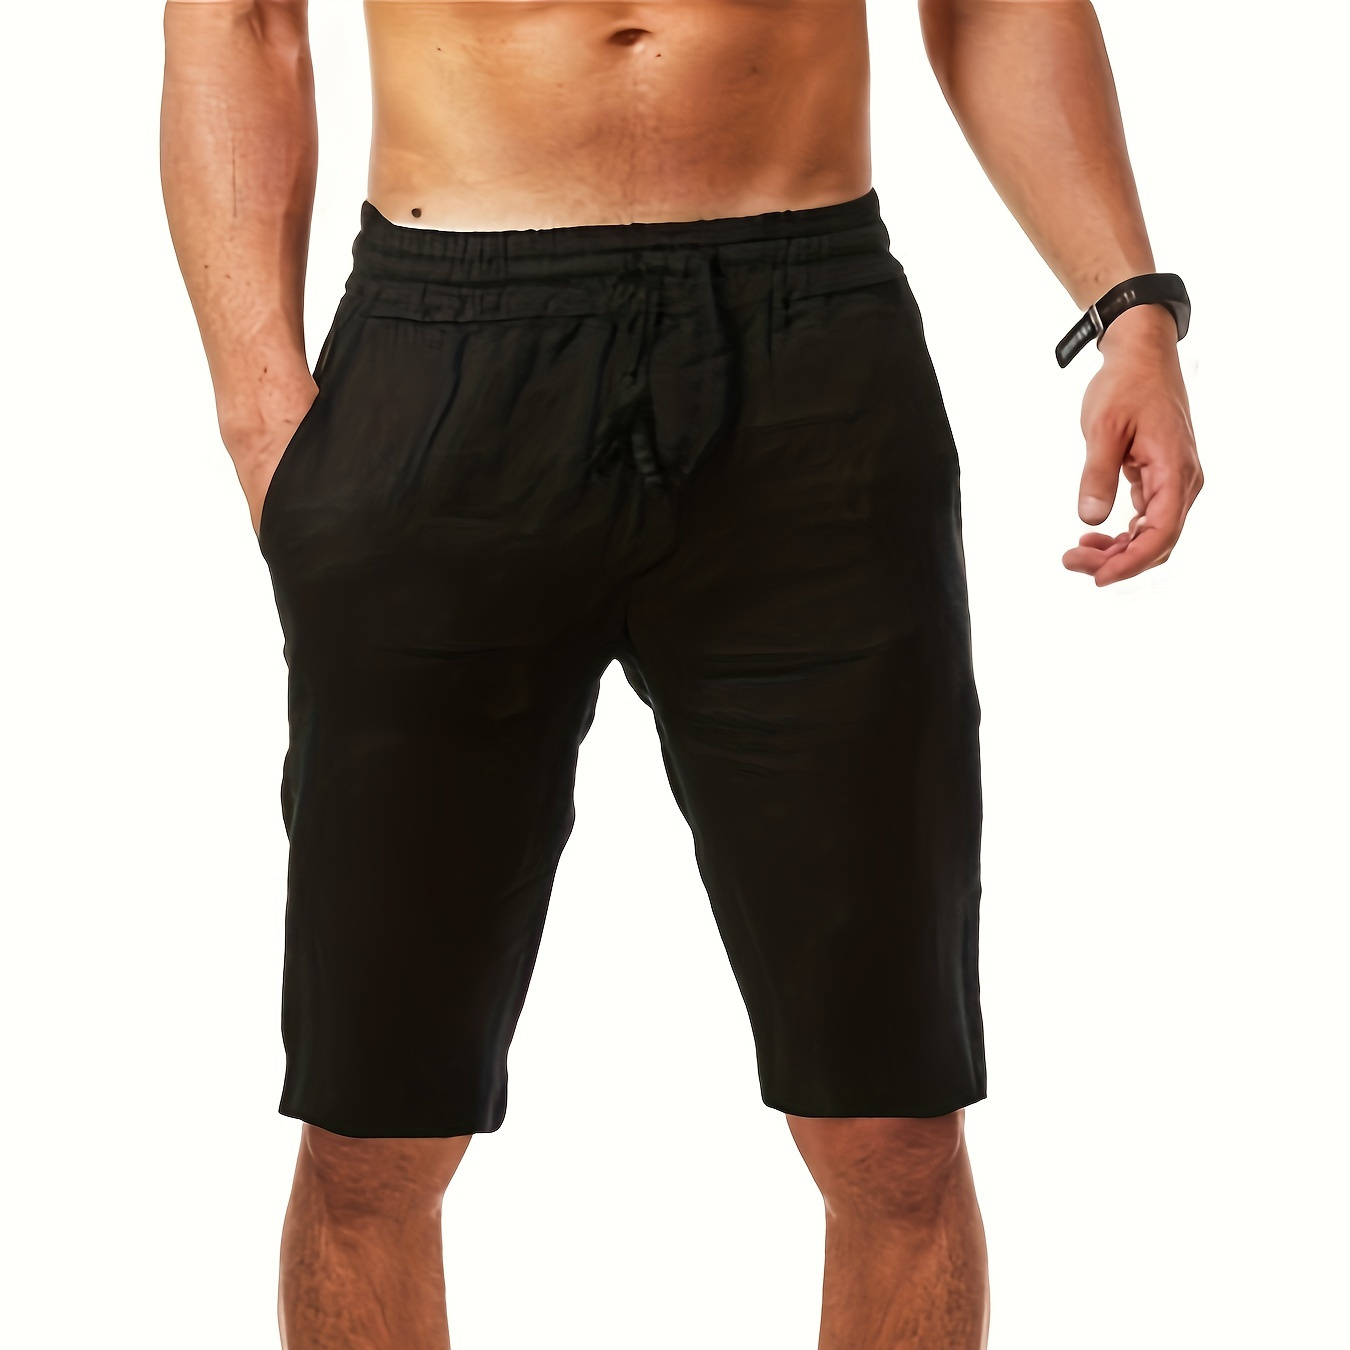 

Solid Color Shorts With Drawstring And Pockets, Casual And Breathable Shorts For Men's Summer Daily Wear And Beach Vacation